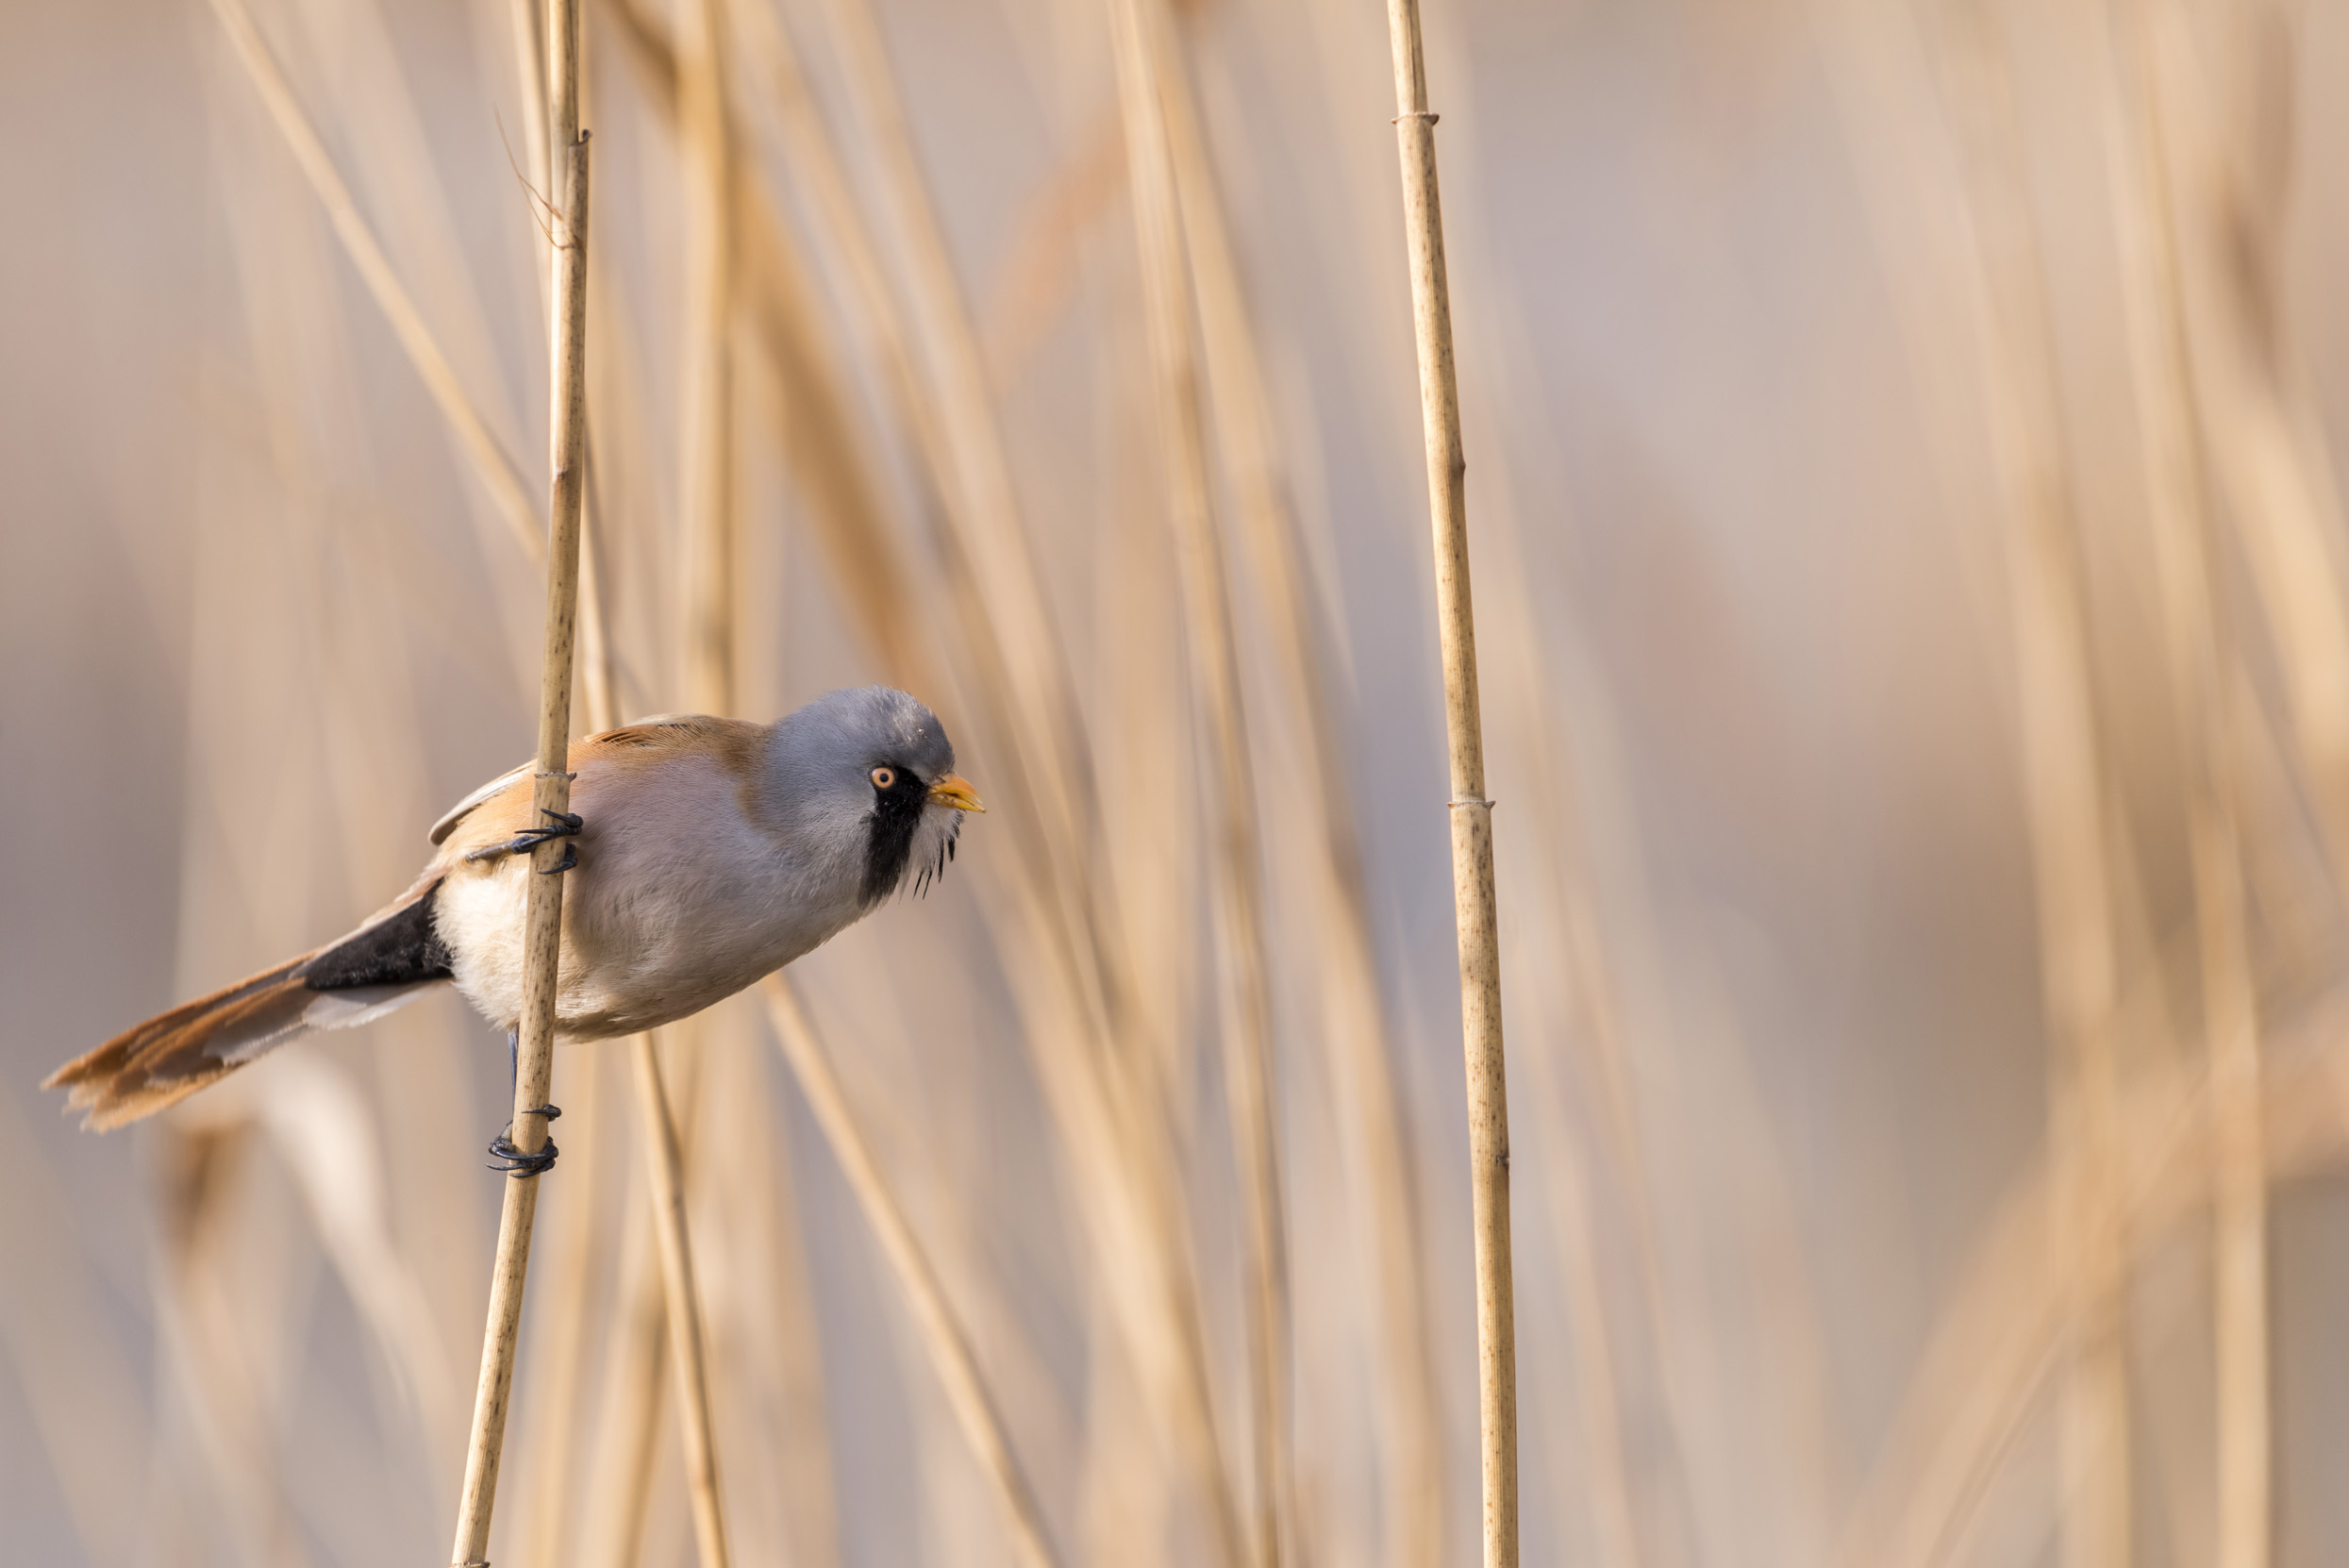 A lone male Bearded Tit perched on reeds with the summer sun beaming down shades of pale pink and orange.